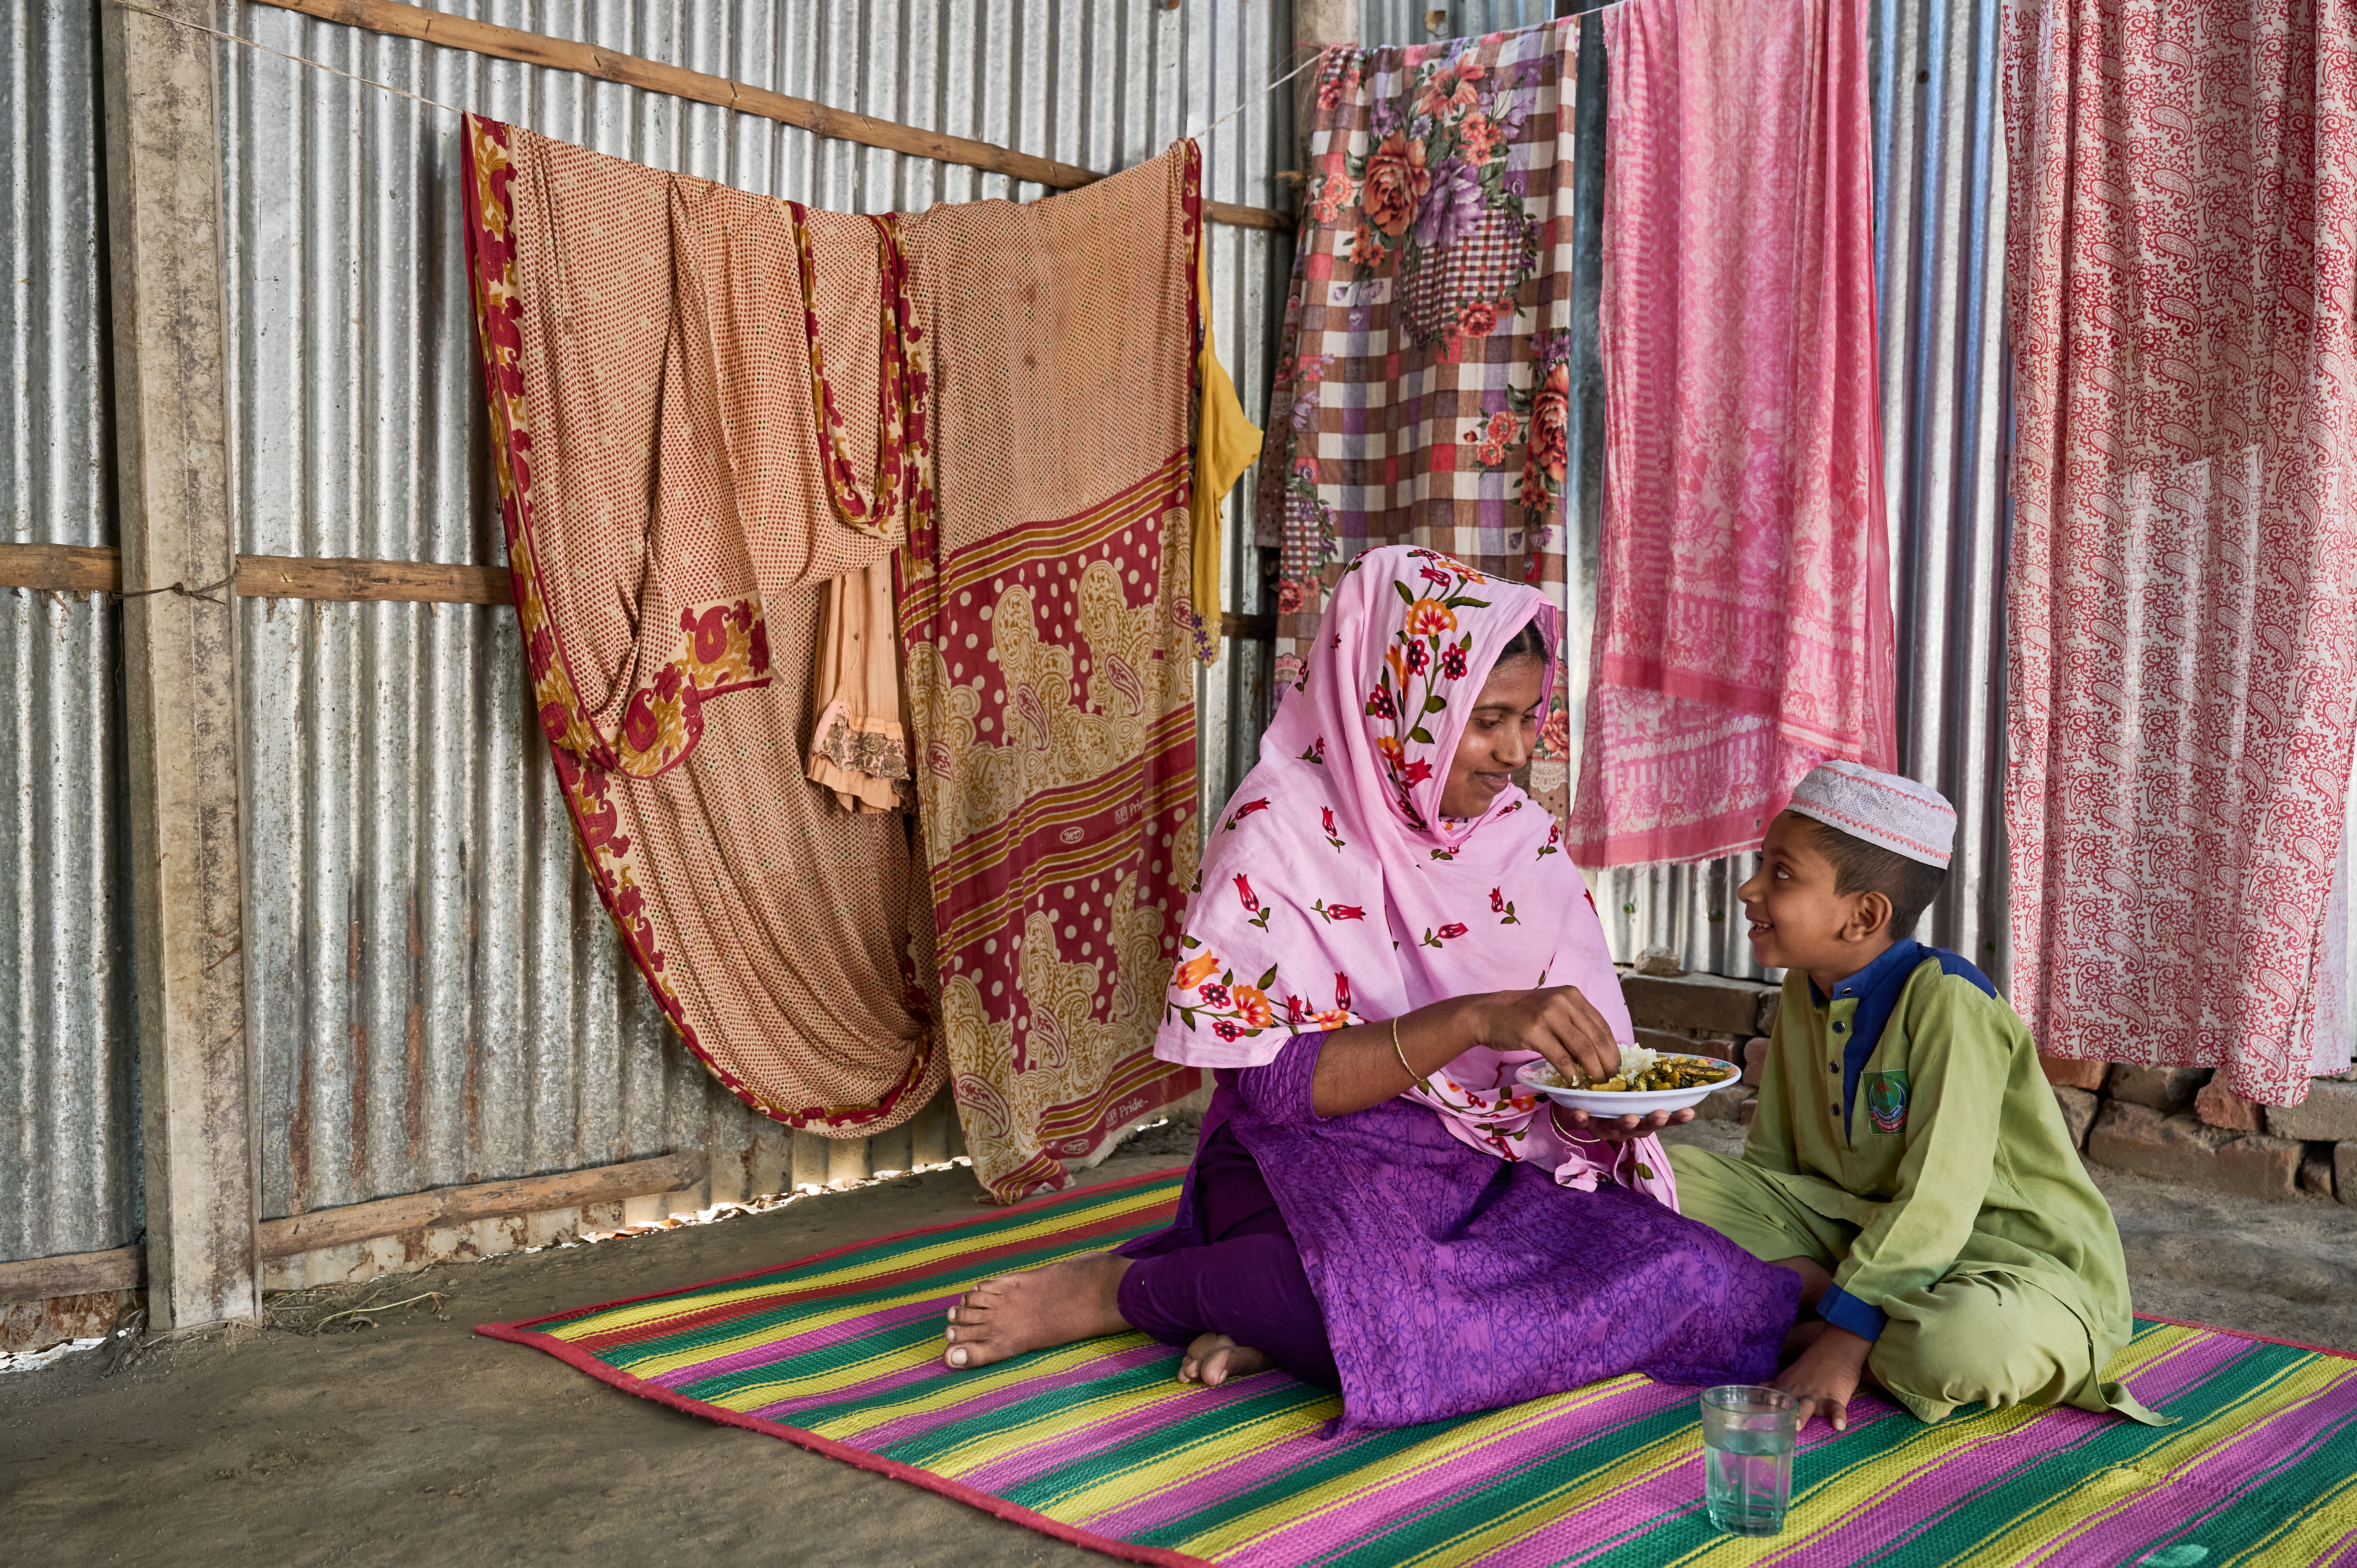 A mother and her son sit on a colourful mat in their home. The mother is feeding her son, a child under 10 years old, a lunch that includes rice fortified with micronutrients.